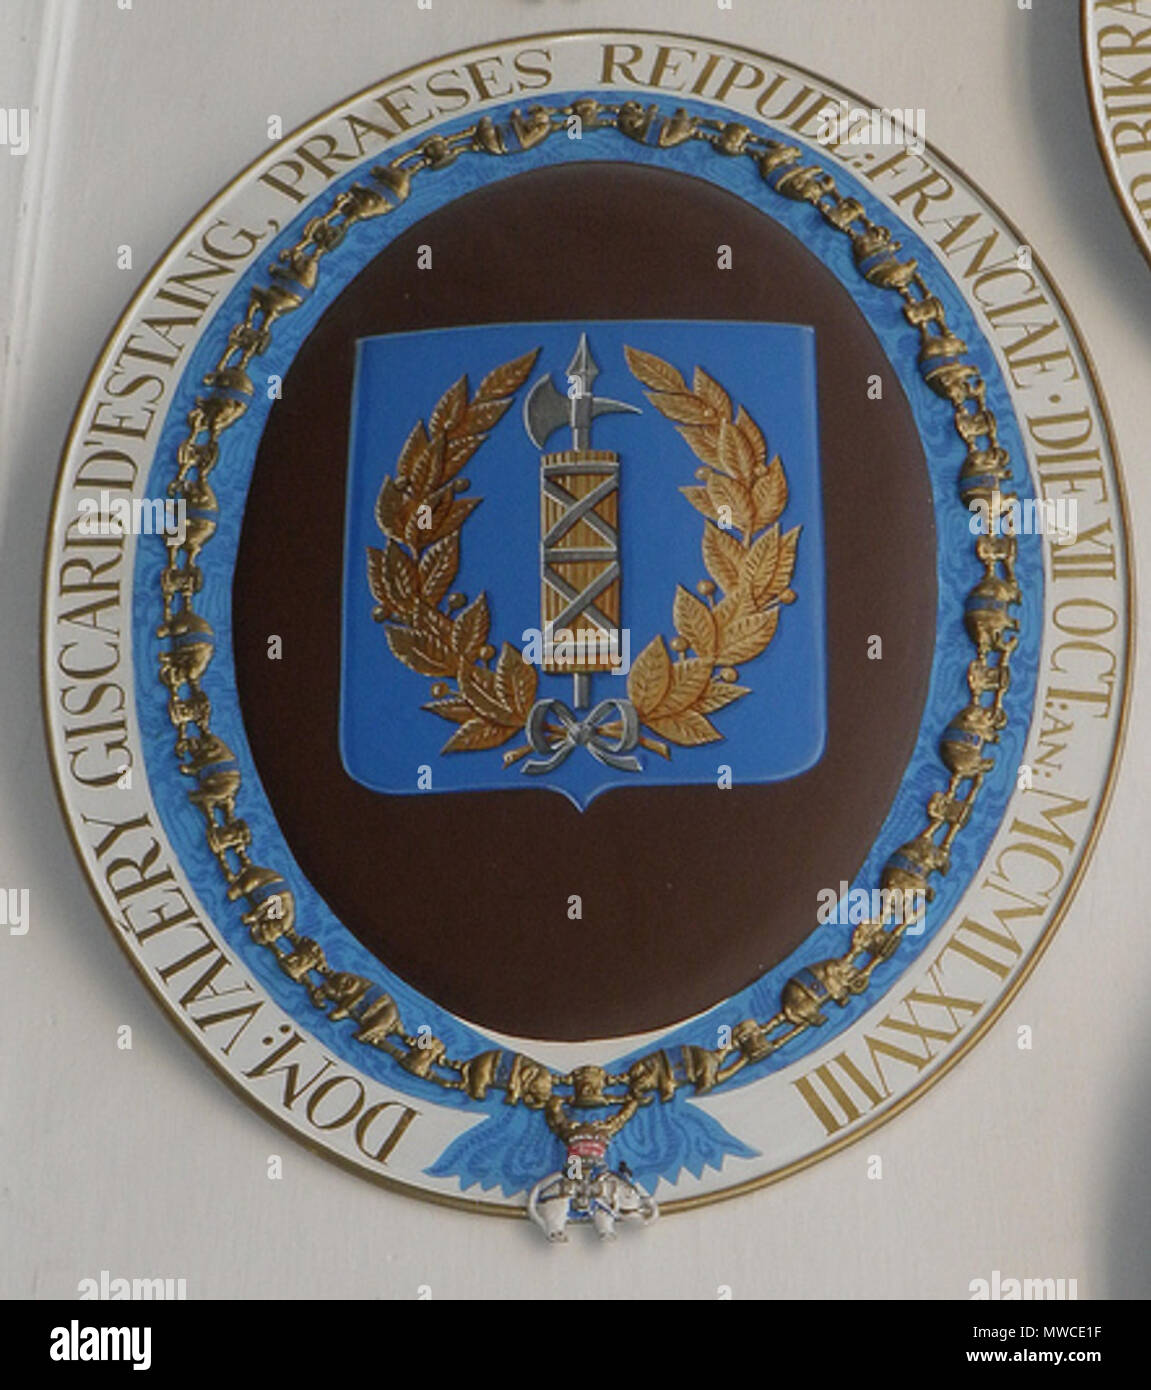 . English: Stall plate of Valery Giscard d'Estaing, President of France, as a Knight of the Order of the Elephant . 28 August 2013, 19:20:43. Jorgen Pedersen 246 Vgearms2 Stock Photo